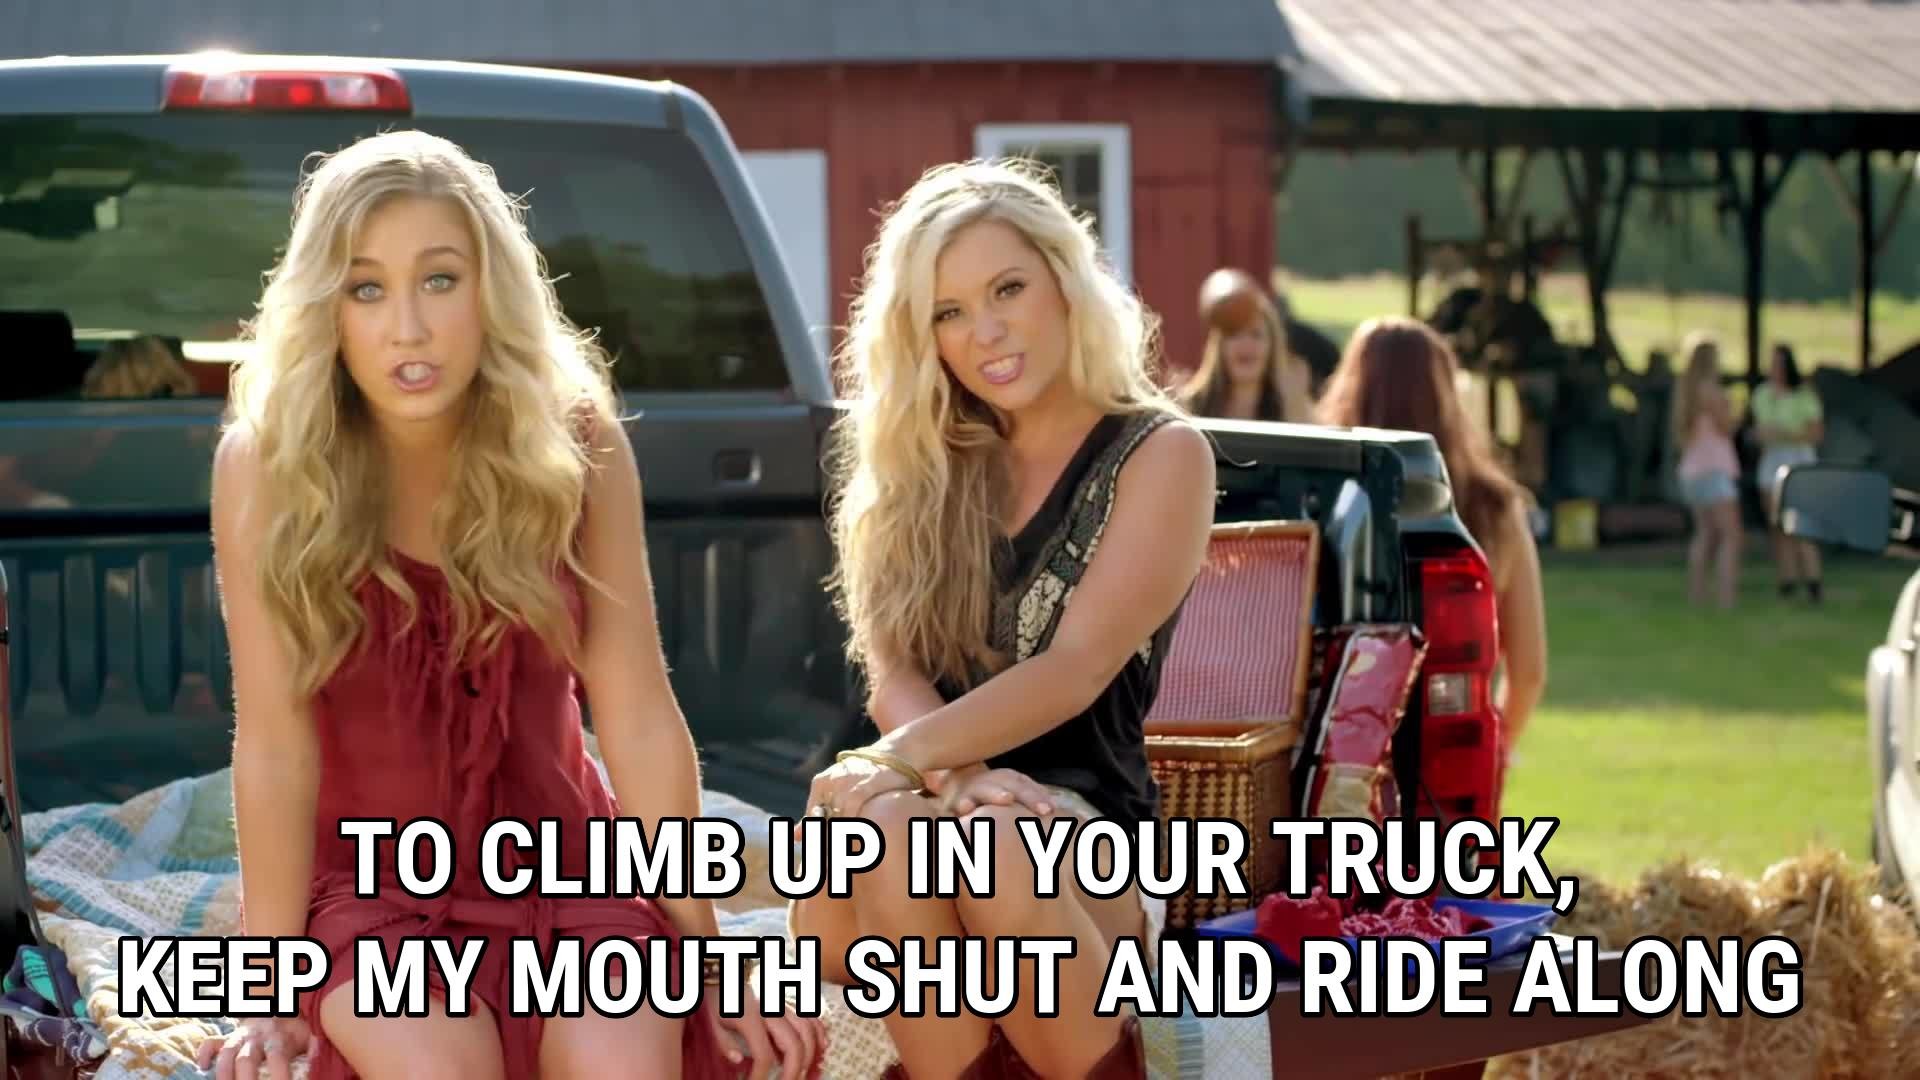 To climb up in your truck, keep my mouth shut and ride along